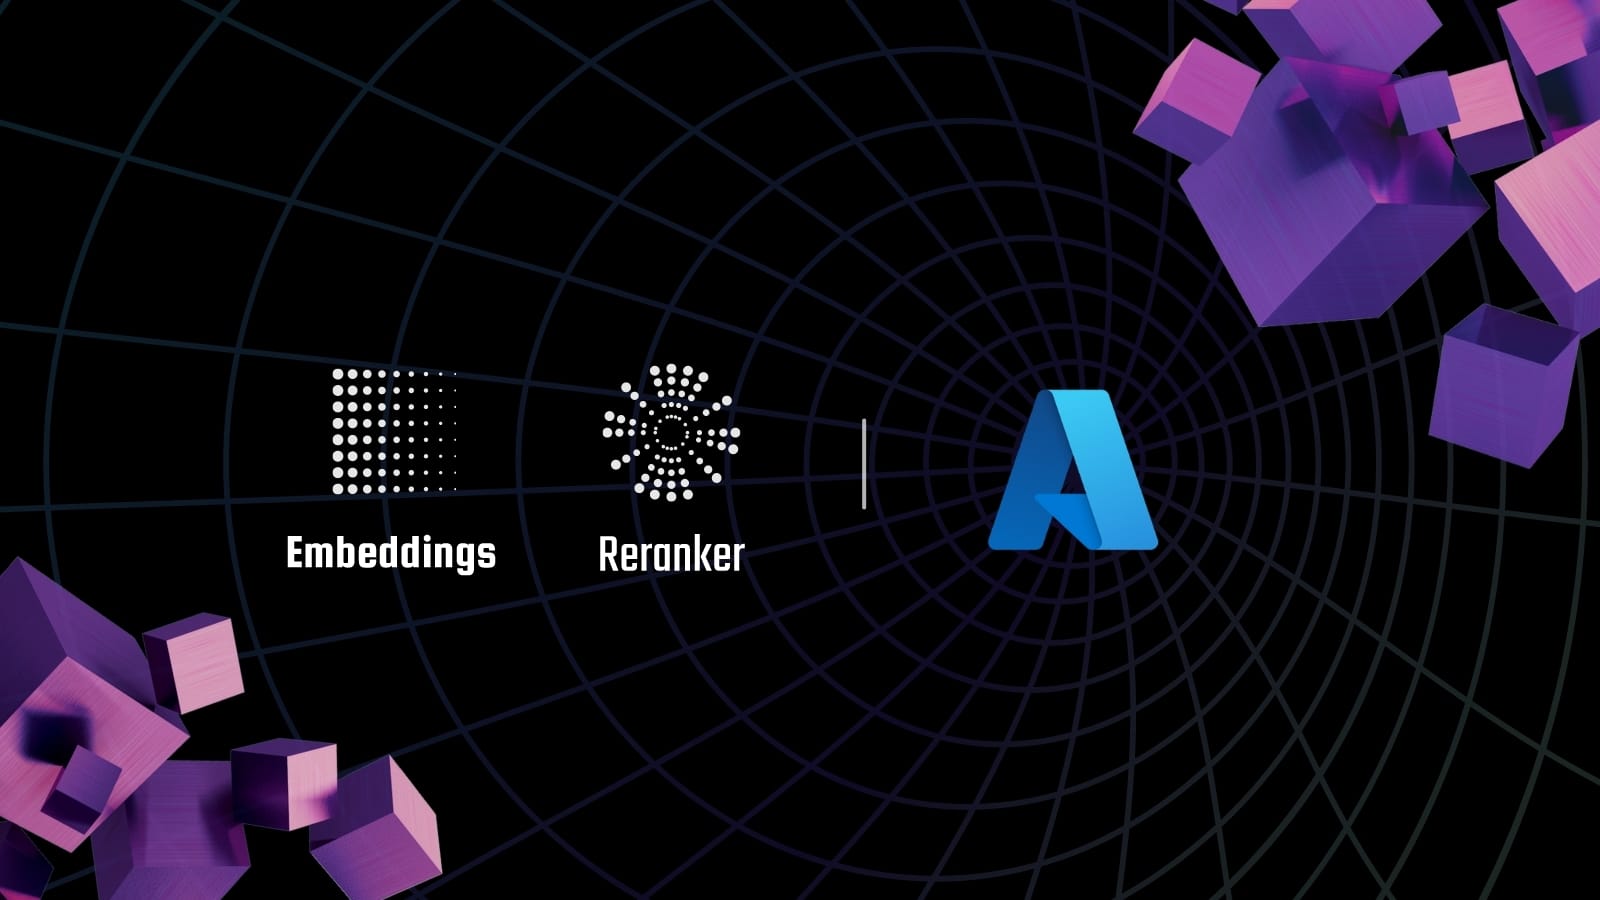 Futuristic black background with a purple 3D grid, featuring the "Embeddings" and "Reranker" logos with a stylized "A".